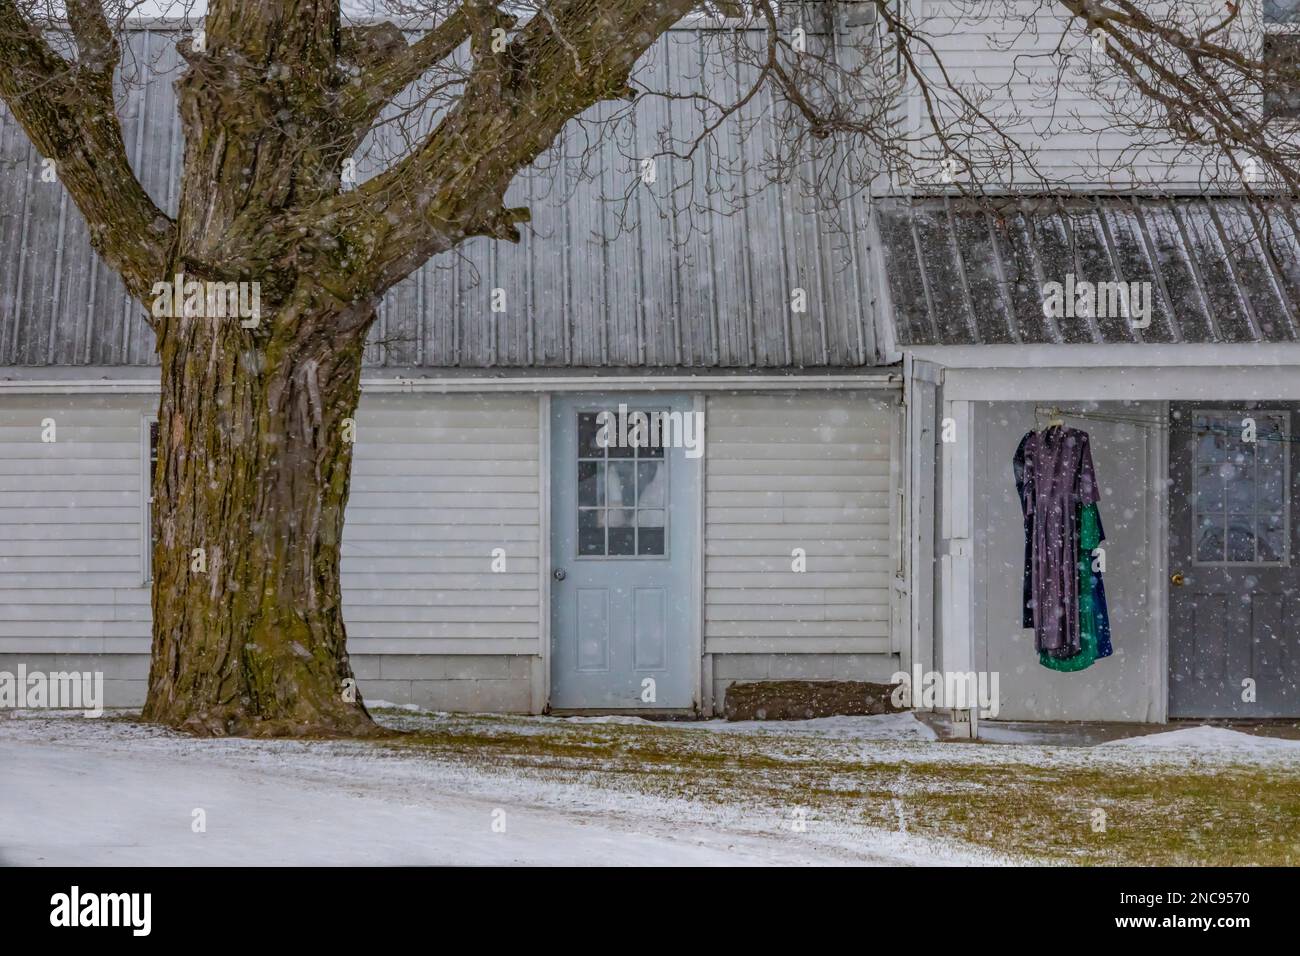 Clothes drying on the front porch of an Amish home in Michigan, USA [No property release; editorial licensing only] Stock Photo